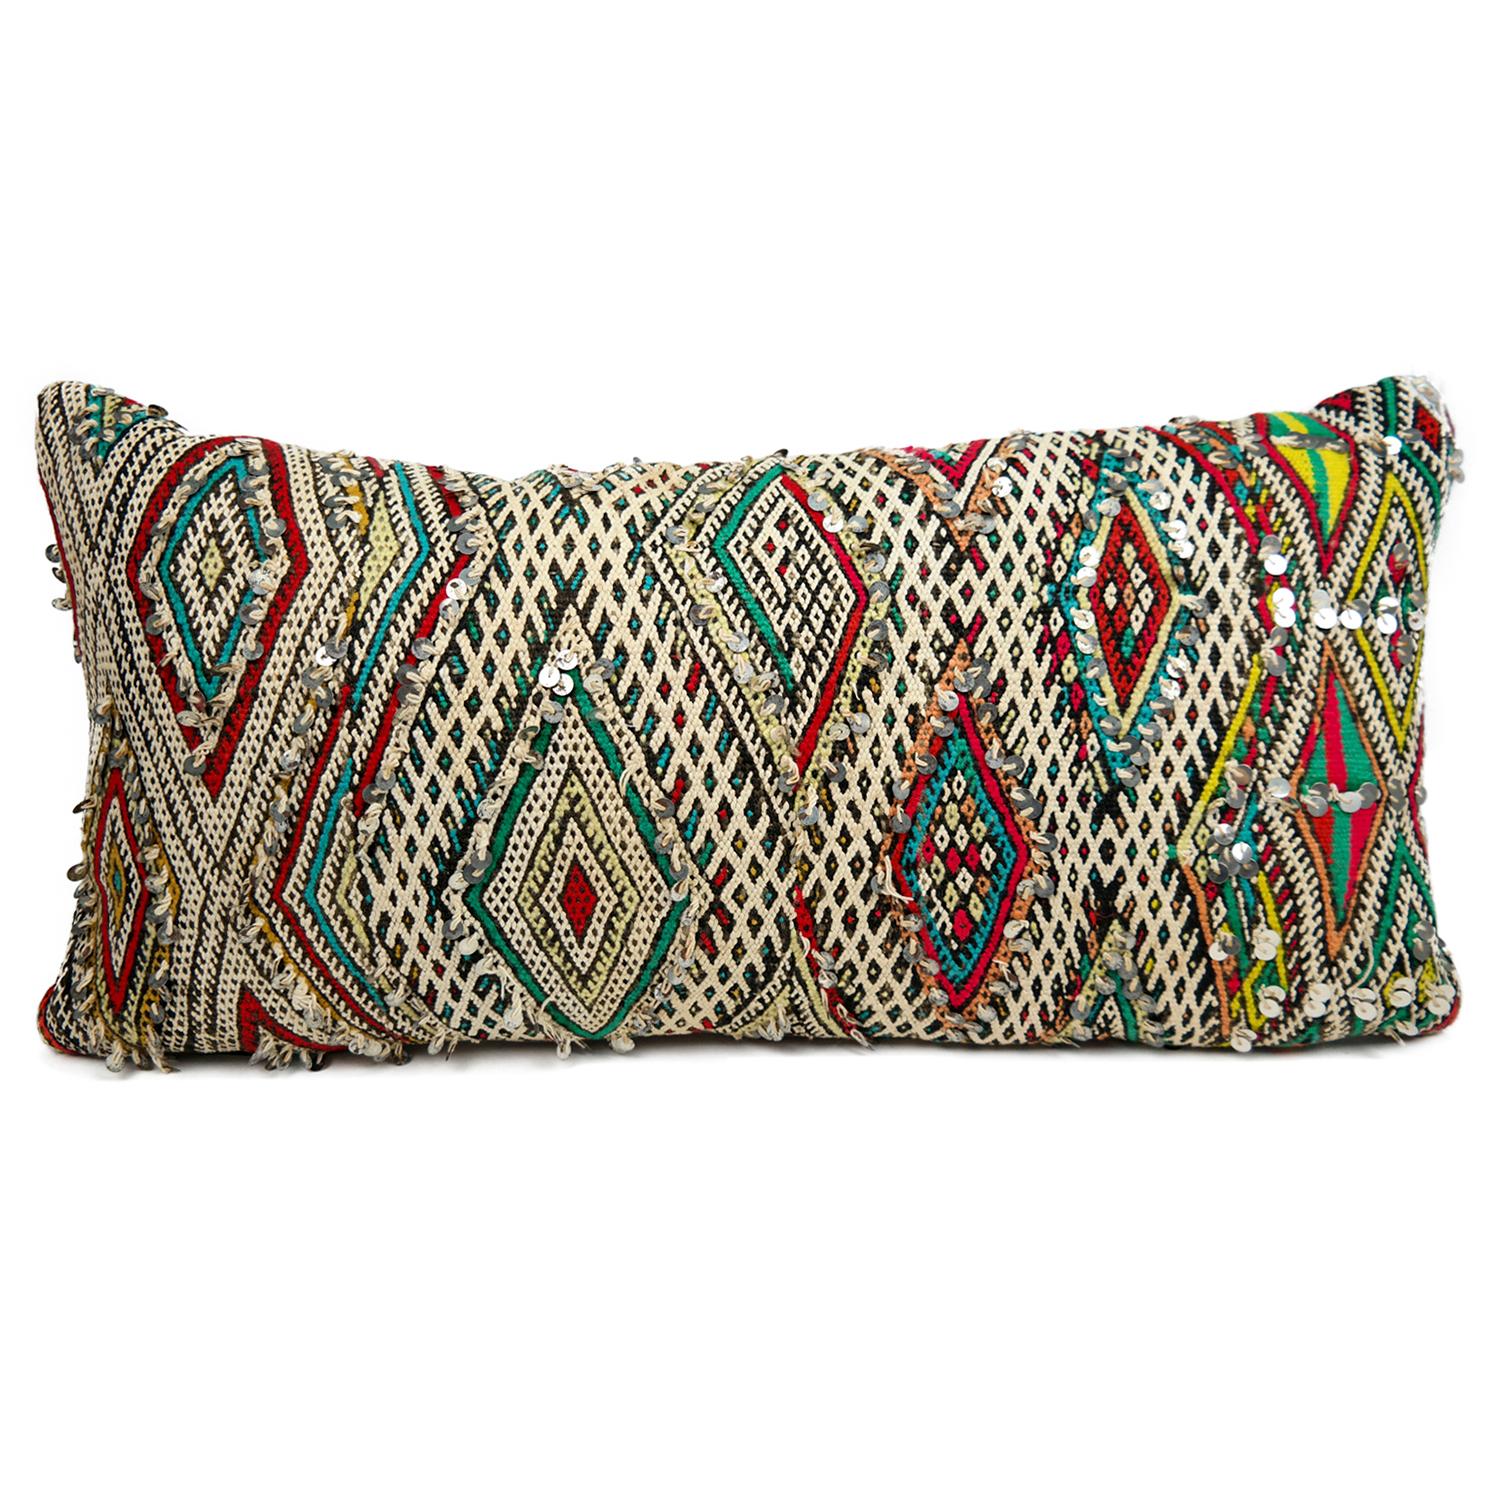 A stunning extra large bohemian Moroccan kilim cushion custom made in Morocco. Cut from a circa 40 years old hand loomed kilim rug, from the Middle Atlas Mountains. We have searched and selected the rug ourselves. The pillow has beautiful colors